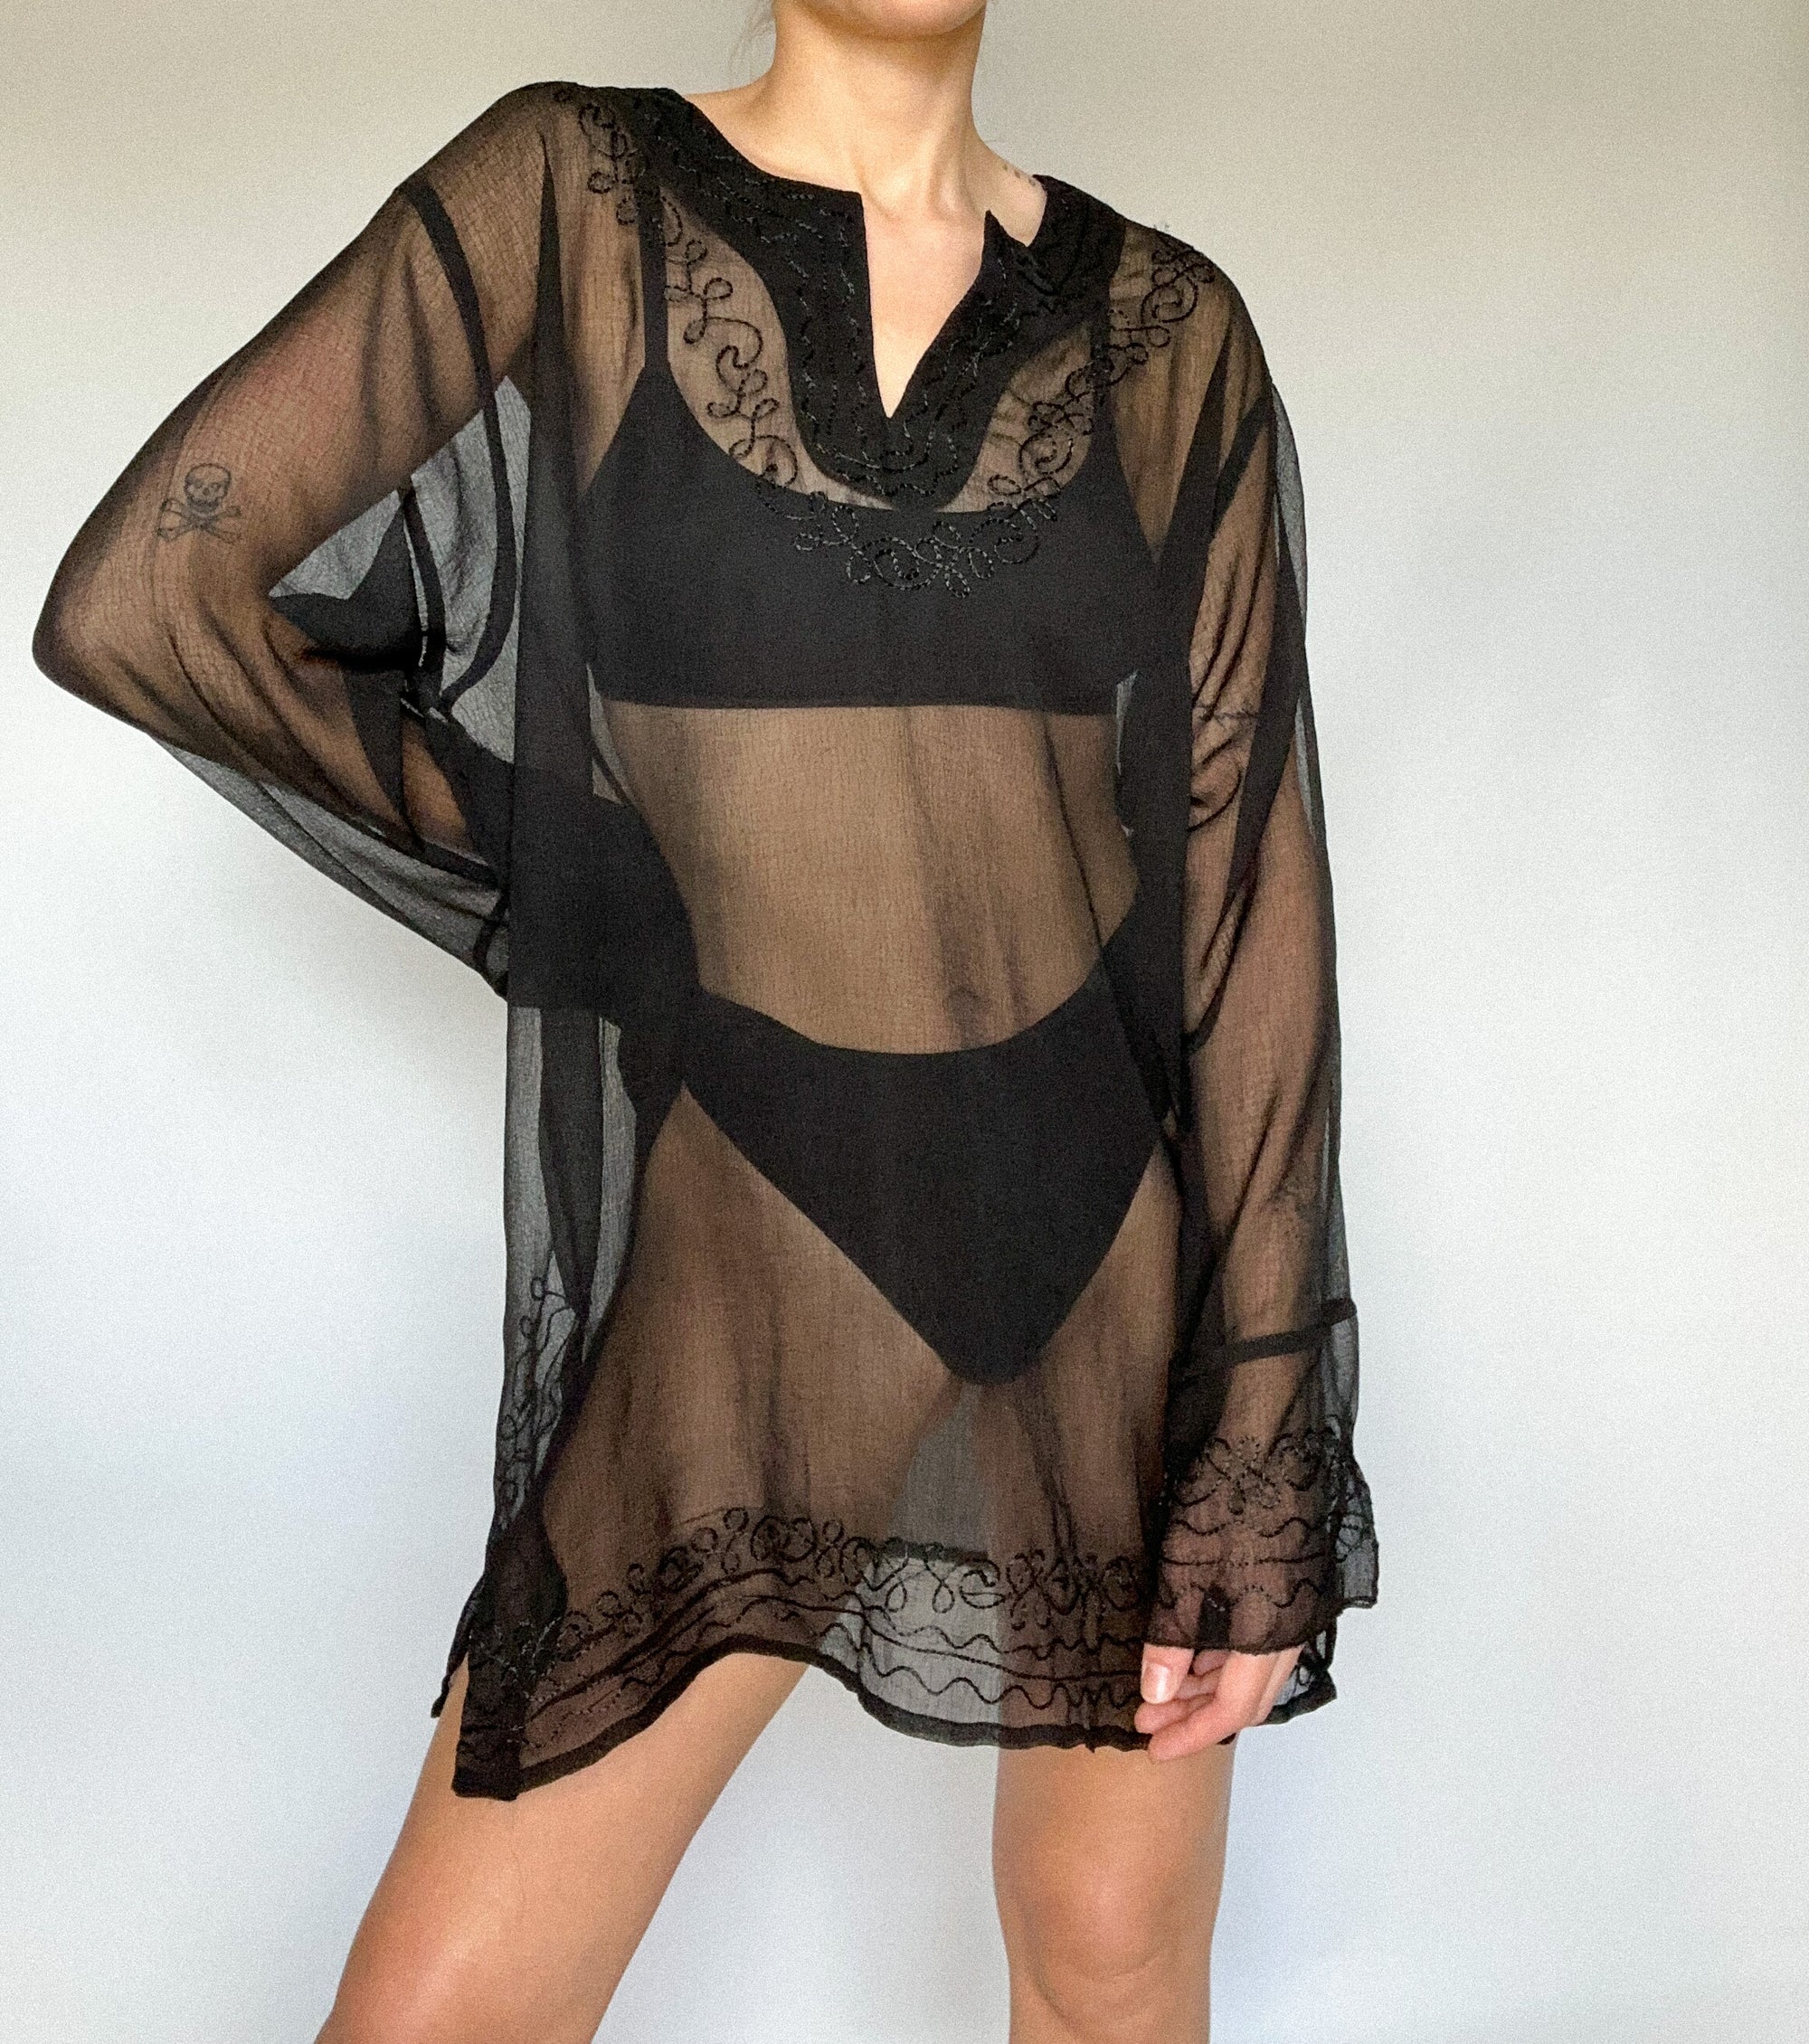 Sheer Dress/Cover Up